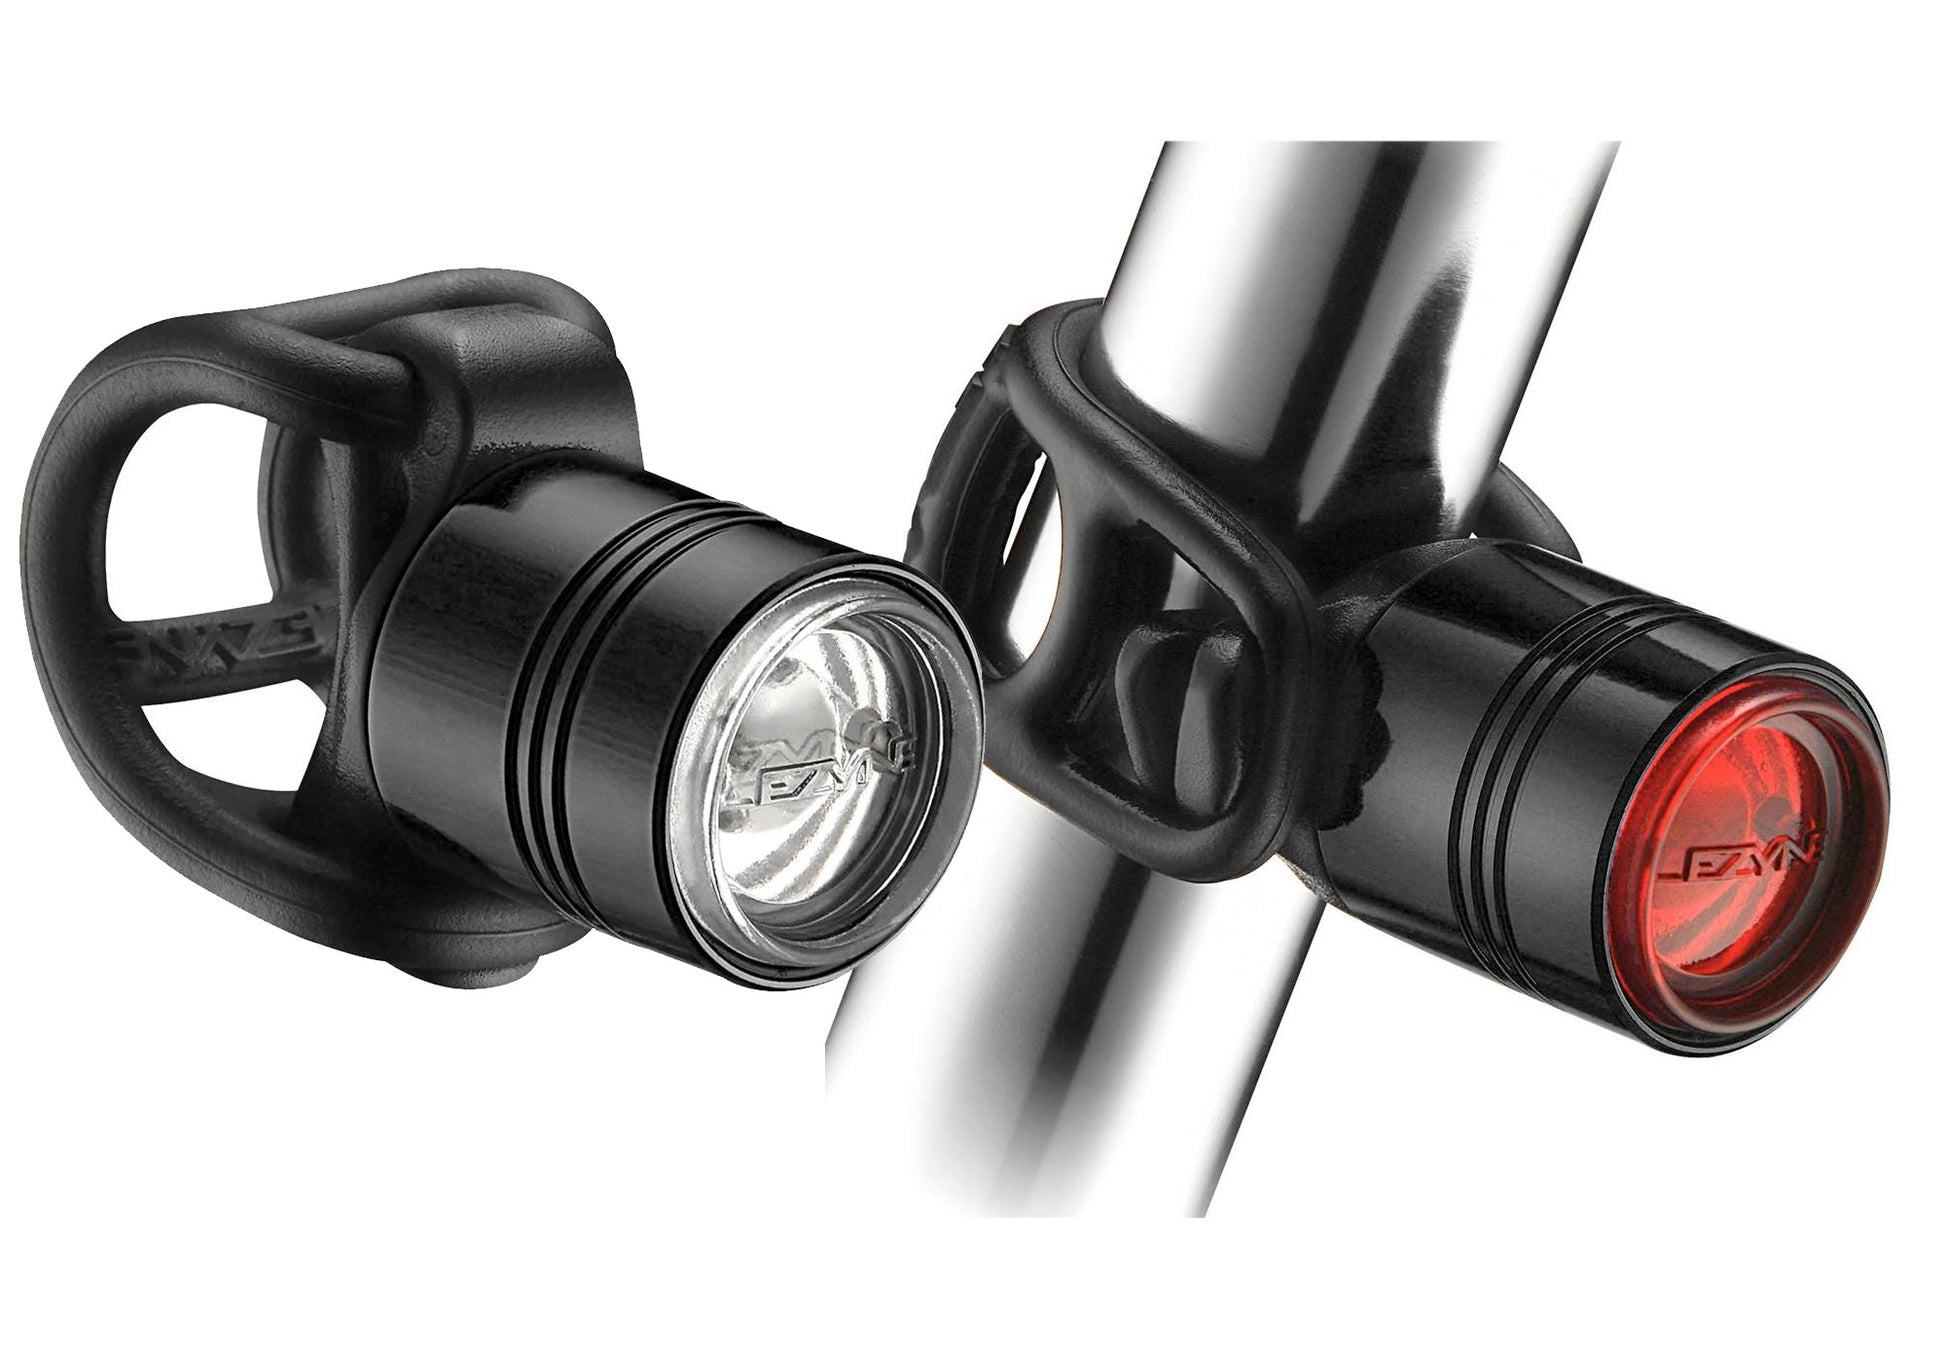 Lezyne Femto Drive USB Front and Real Lights (Pair)